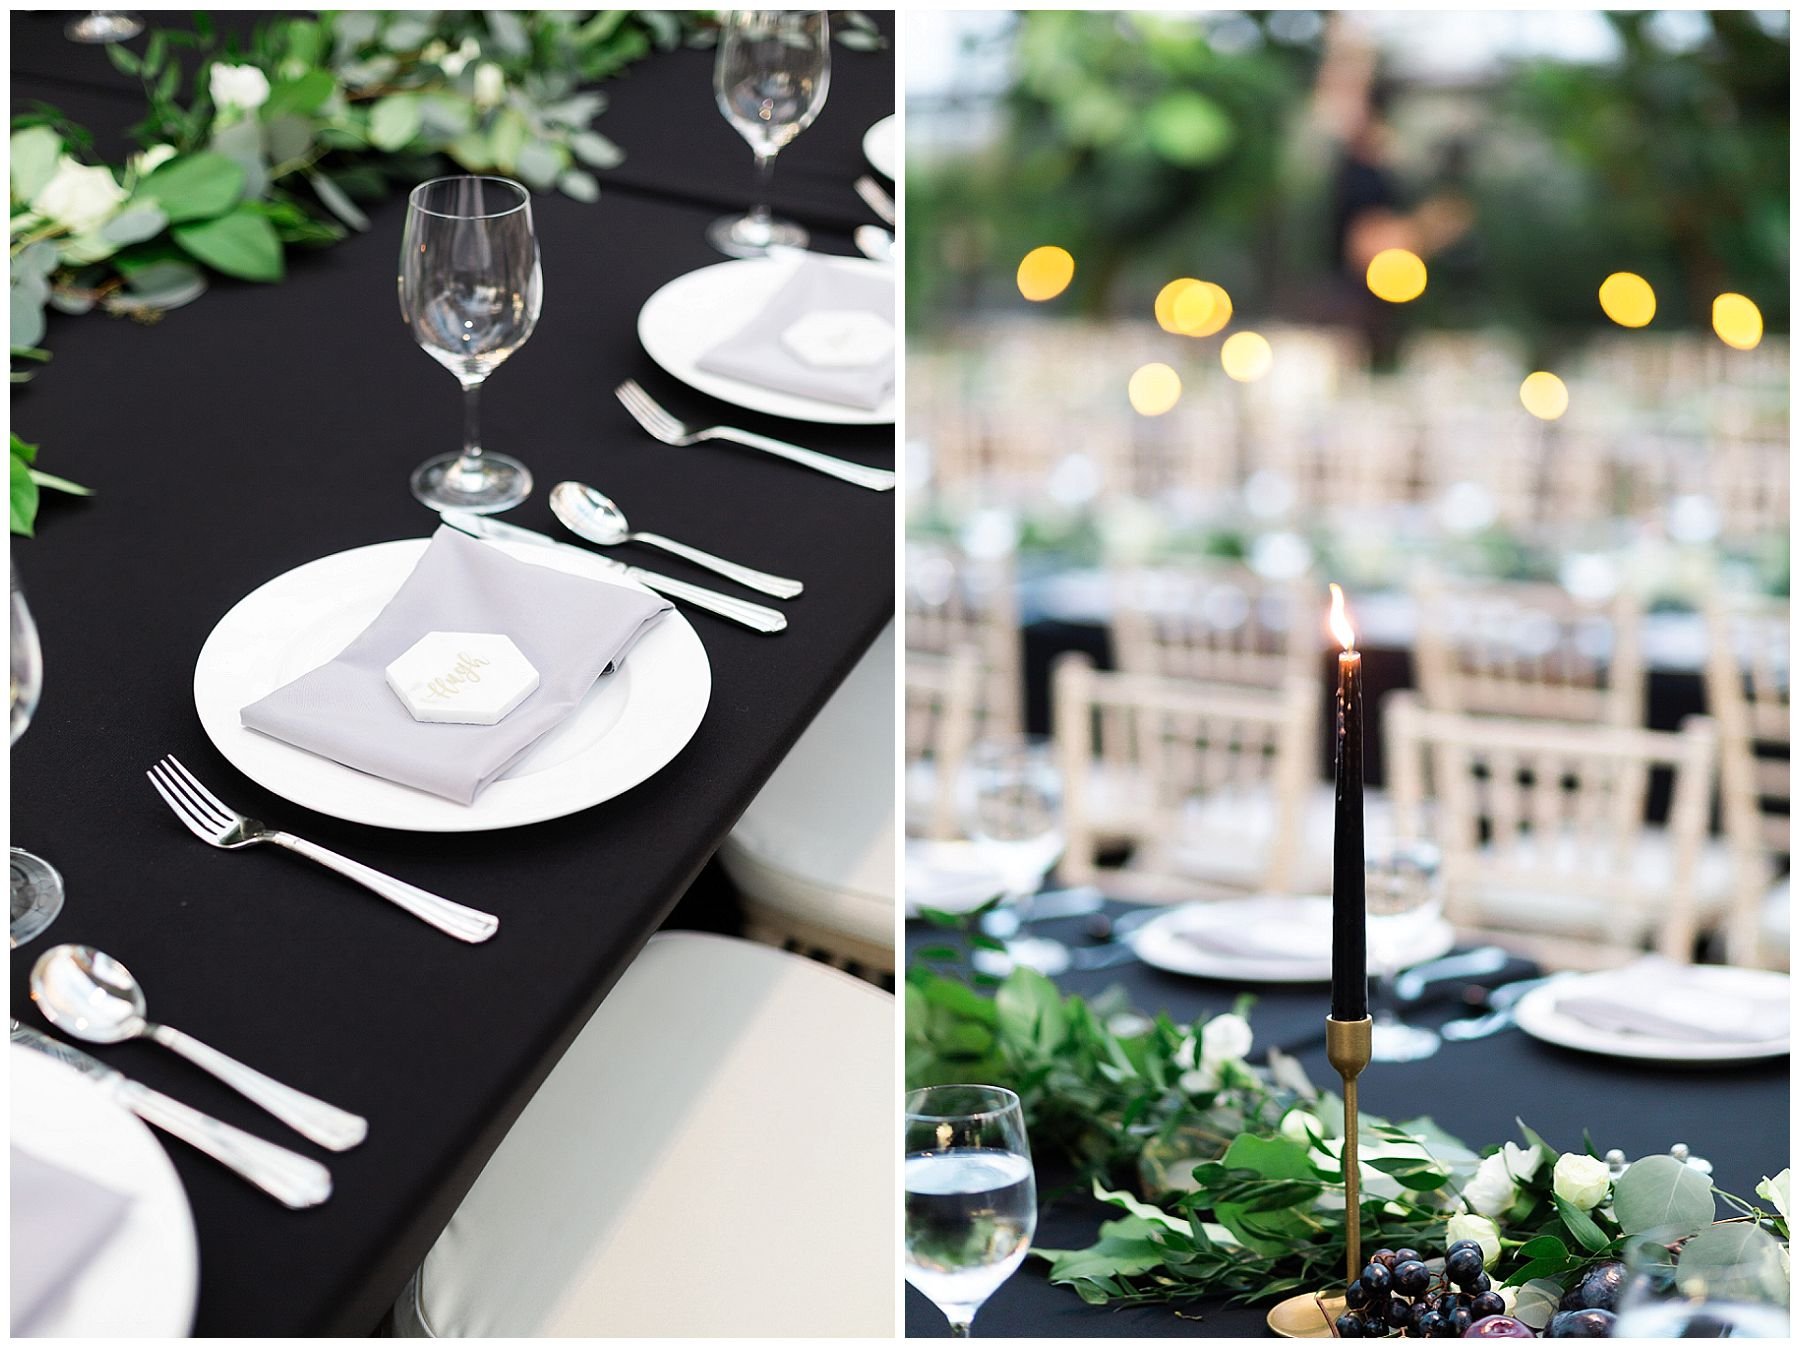 Wedding decor of black linens, Ivory chairs, gold accents and exotic fruits